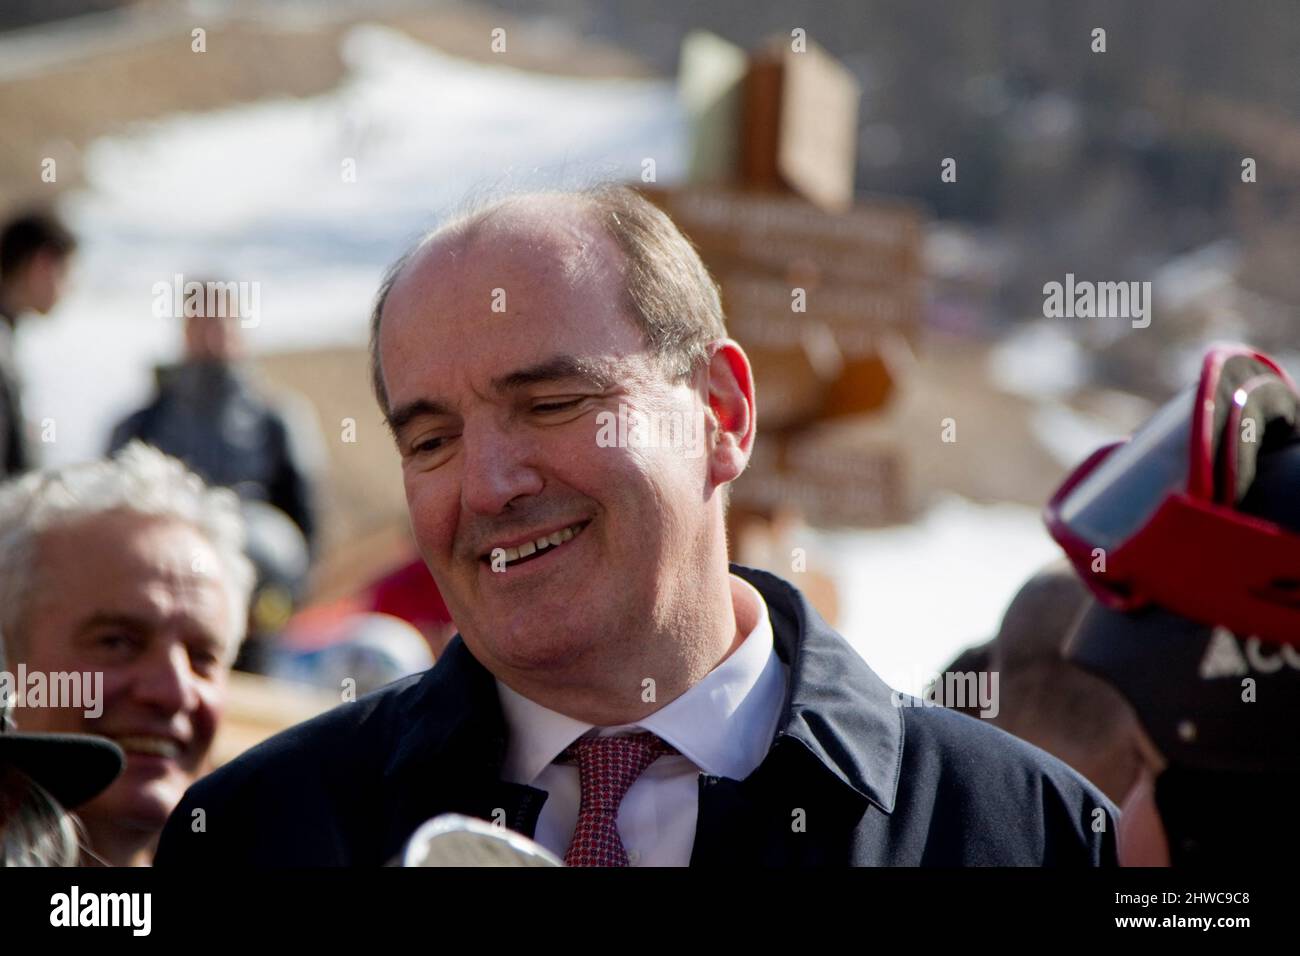 Les Orres Hautes Alpes, France. 05th Mar, 2022. Jean CASTEX Prime Minister, France on March 05, 2022. Jean Castex traveling to Les Orres in the Hautes Alpes, he came to talk about the transitions undertaken as part of the Avenir Montagnes plan to elected officials and local actors. Photo by Thibaut Durand /ABACAPRESS.COM Credit: Abaca Press/Alamy Live News Stock Photo